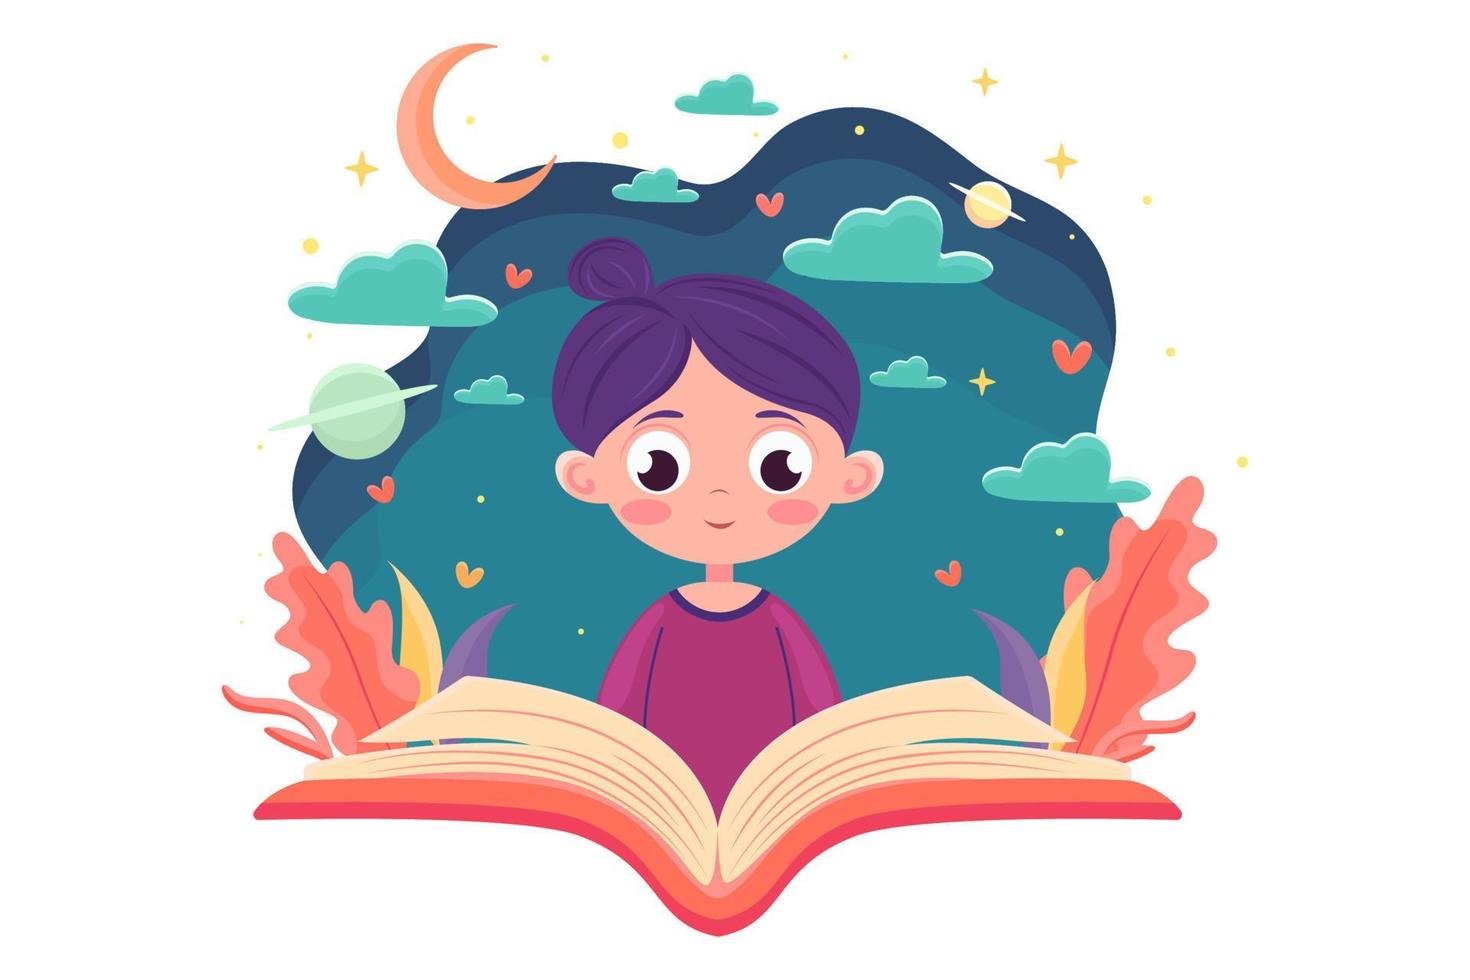 A girl reading an interesting book at night or late at night, reading, the concept of immersion in a book, interesting stories, World Book Day or Children's Book Day vector